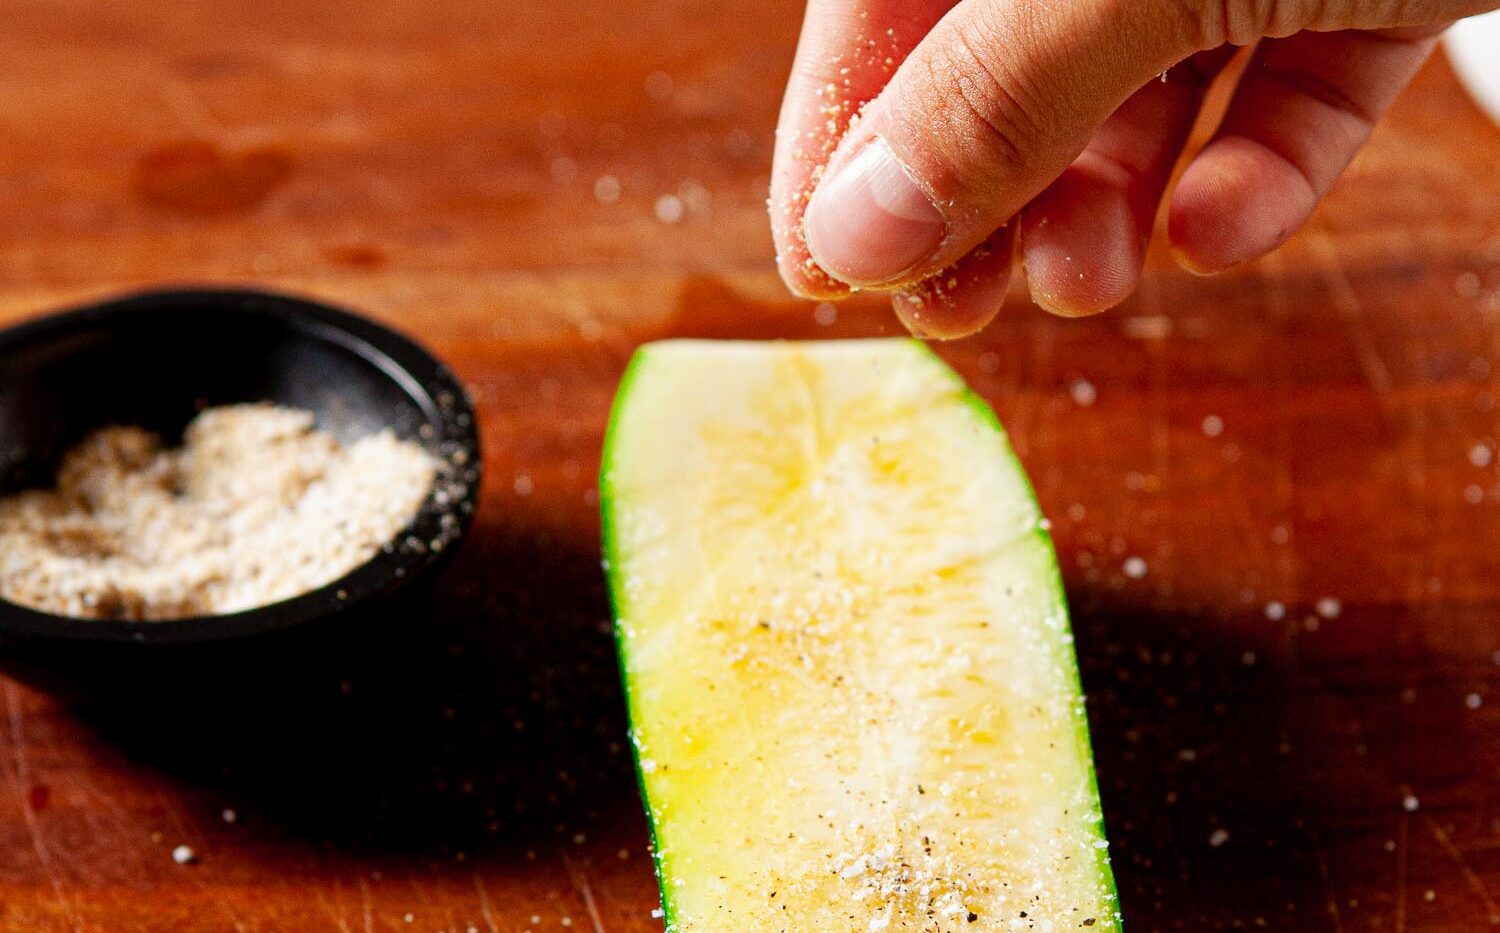 zucchini halves sprinkled with salt and pepper